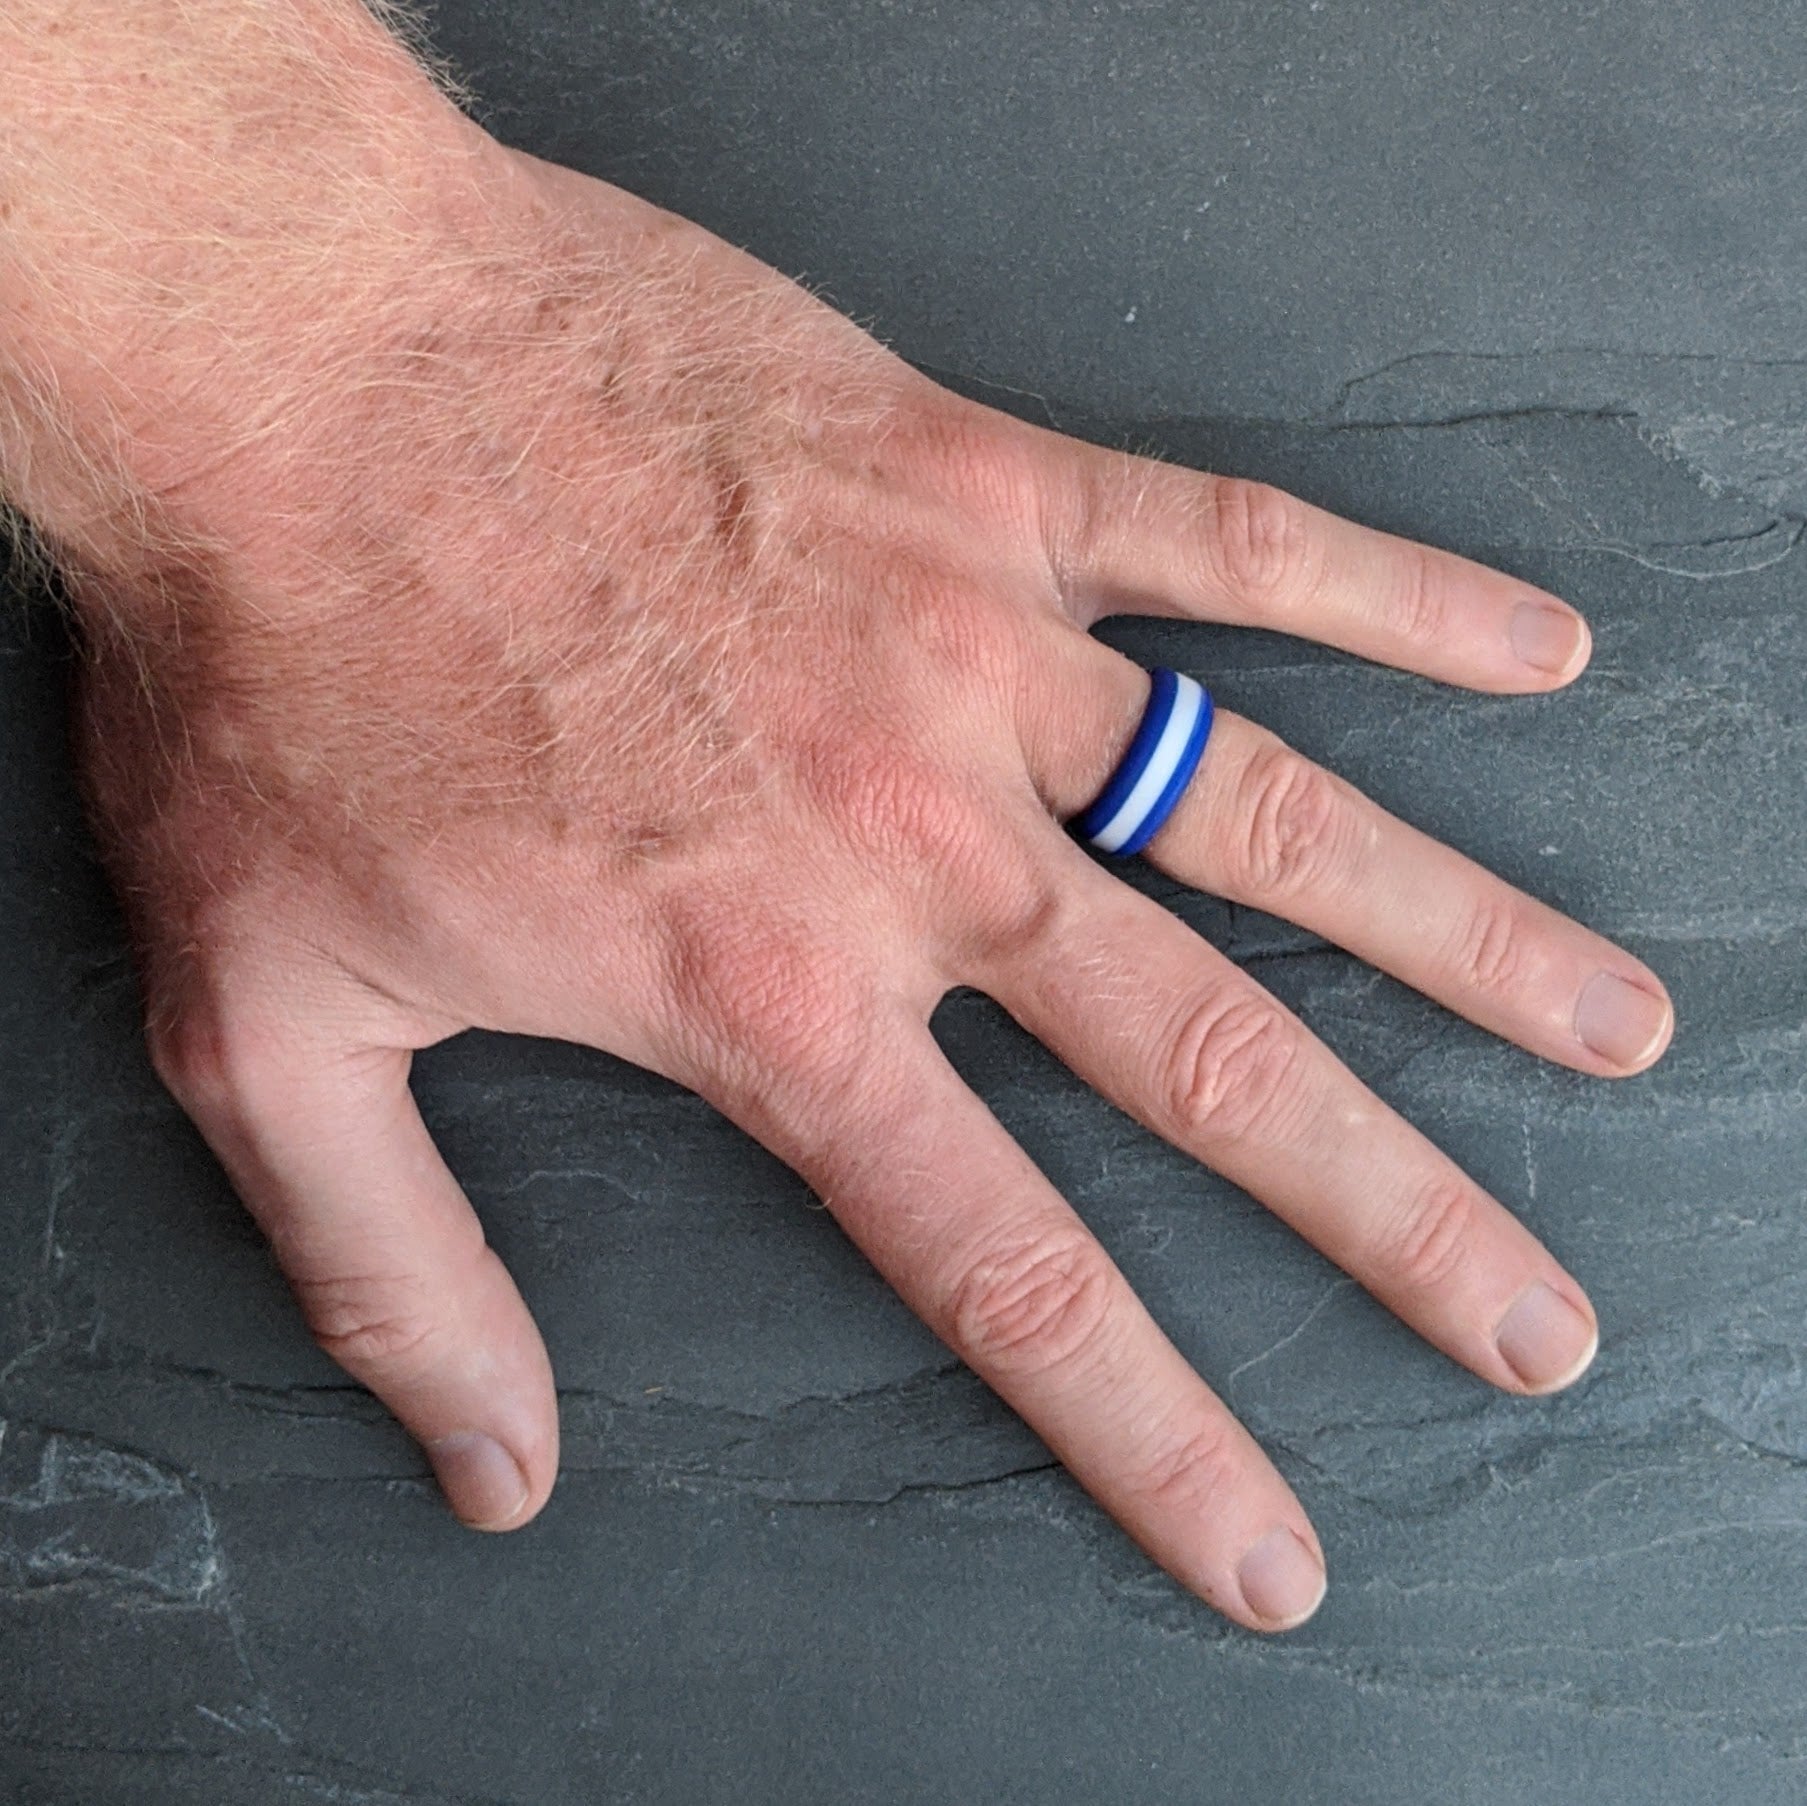 Blue and White Stripe Silicone Ring for Men - Knot Theory